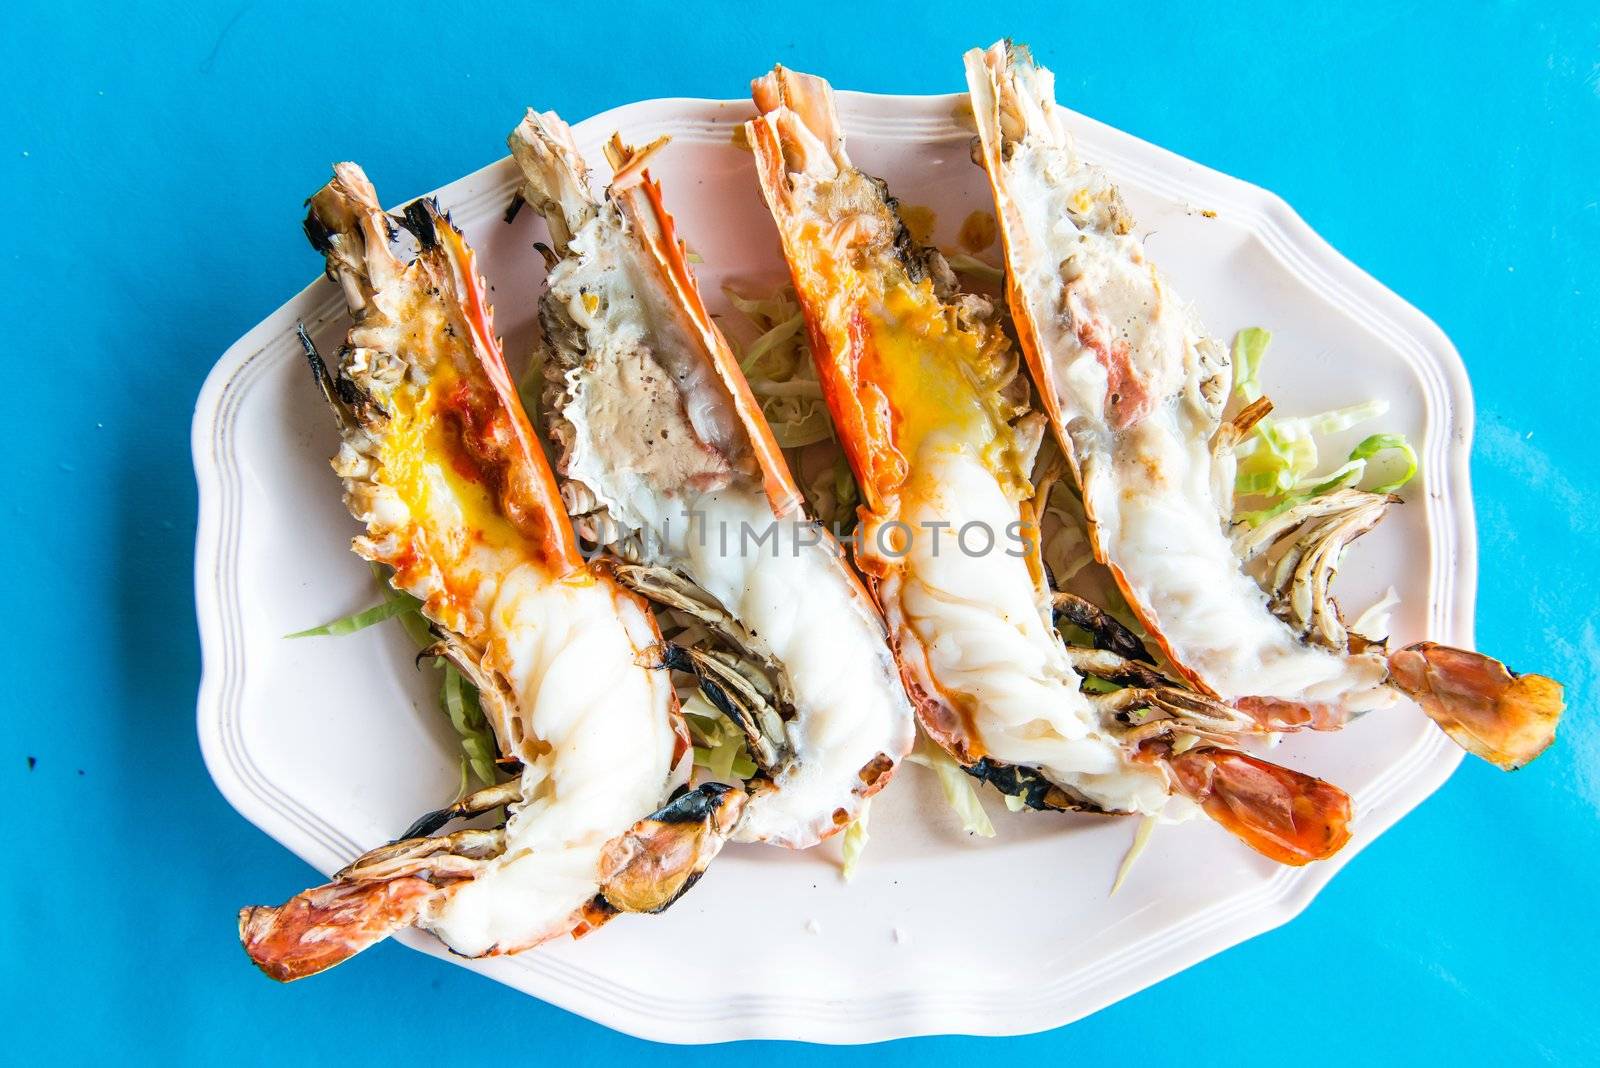 Grill river prawns on a plate with blue background, cut in half and expose its meat